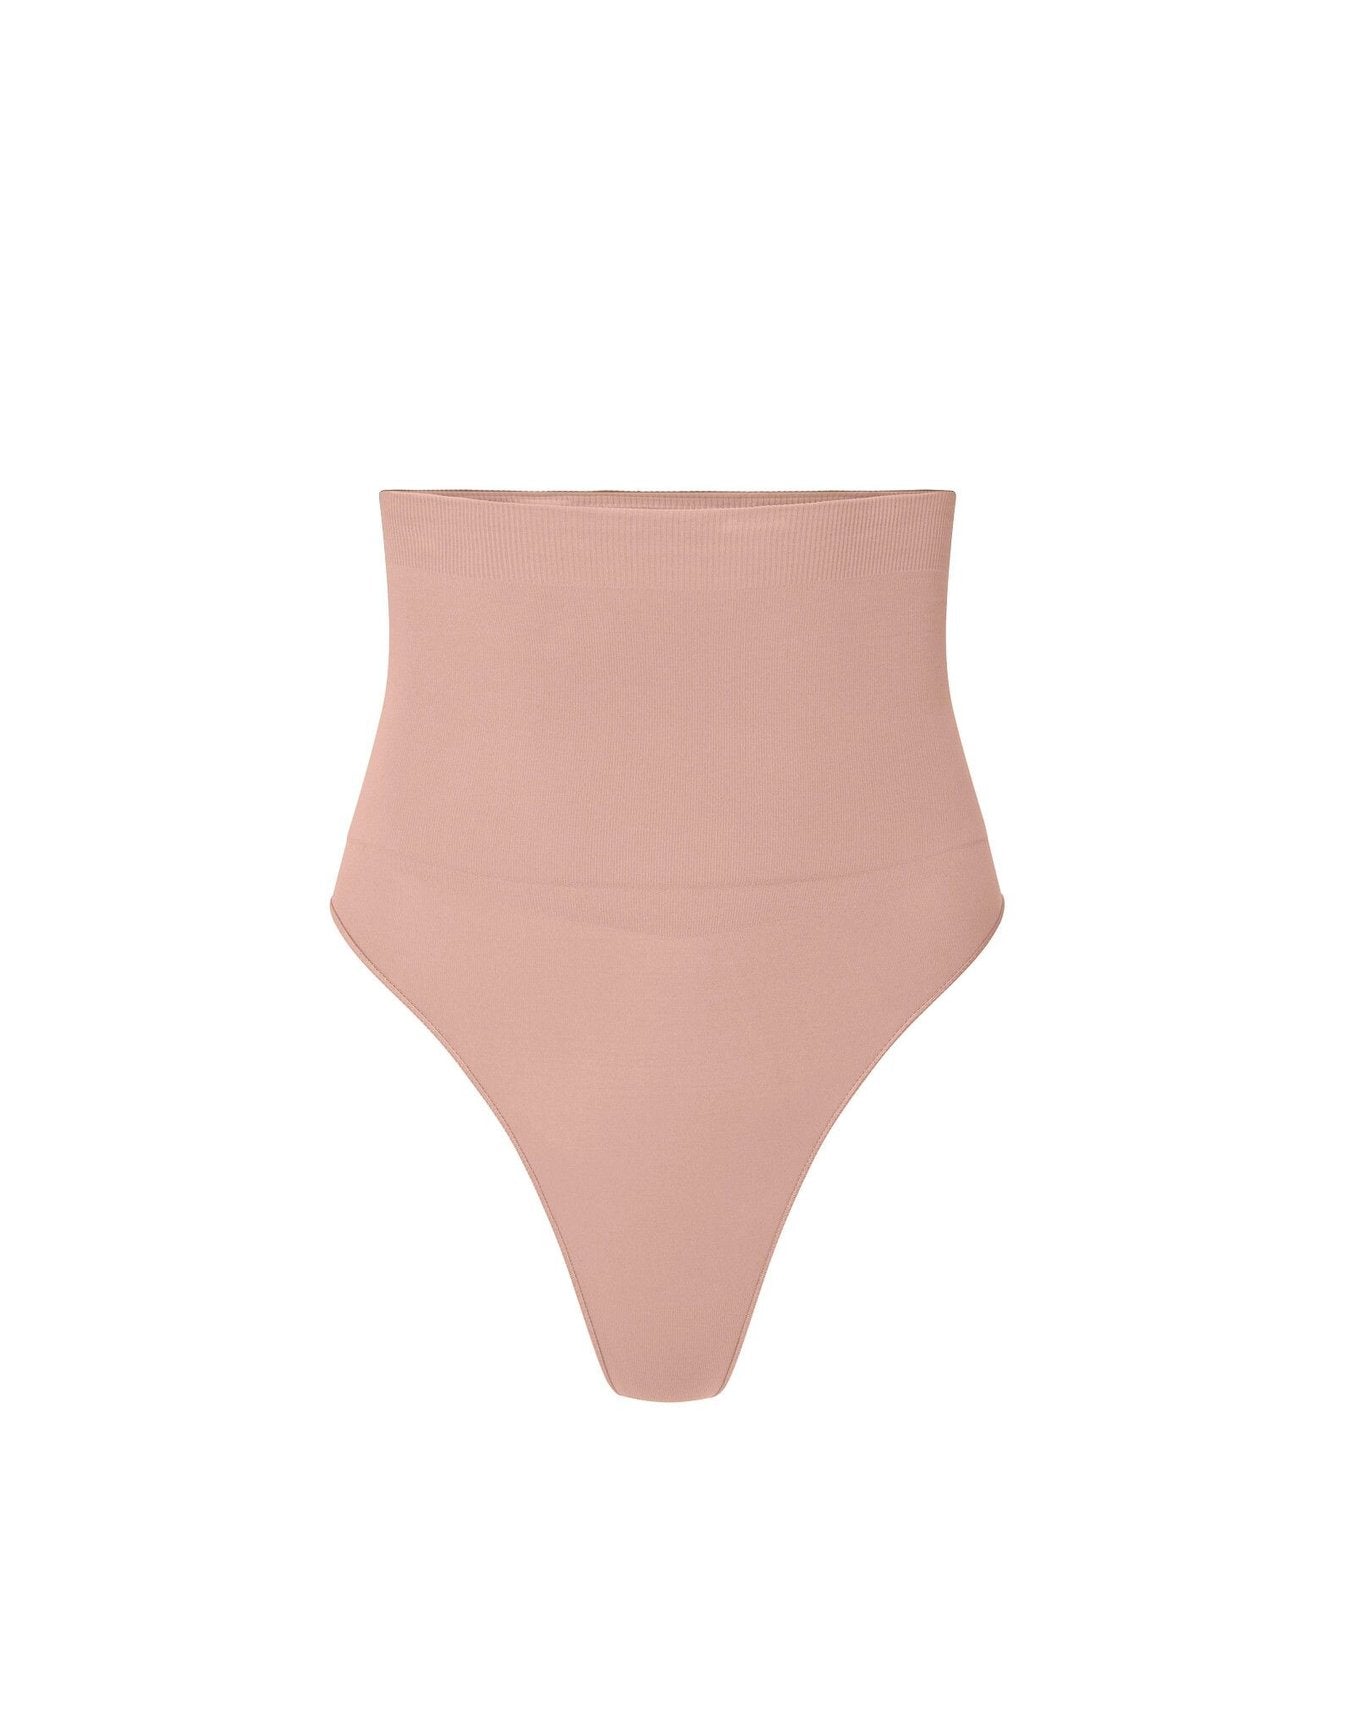 nueskin Elodie High-Compression High-Waist Thong in color Rose Cloud and shape thong